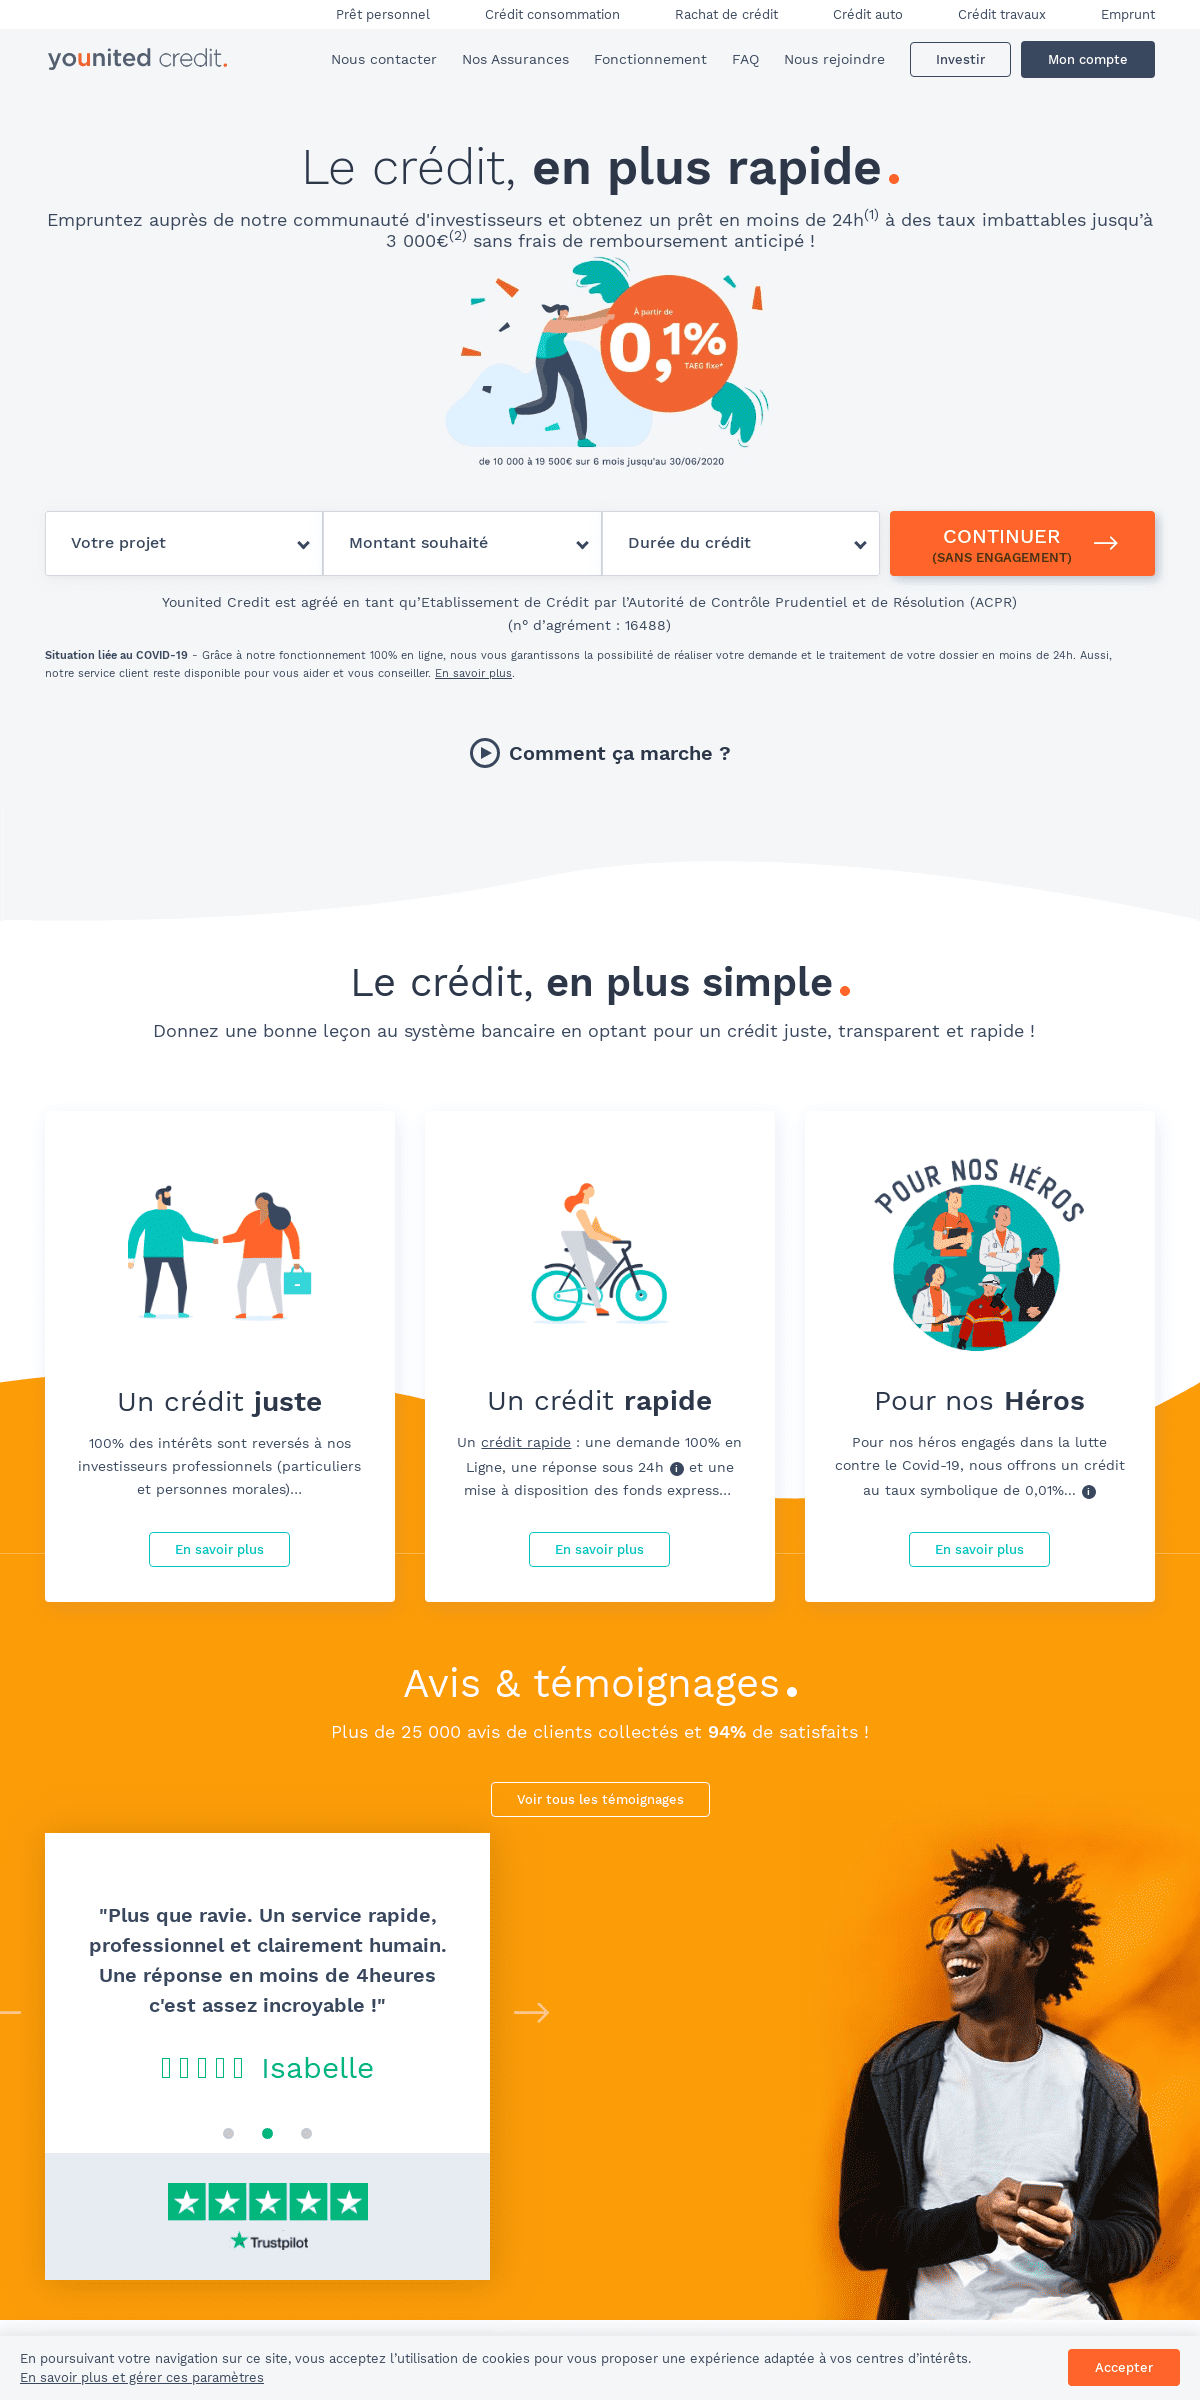 A complete backup of younited-credit.com